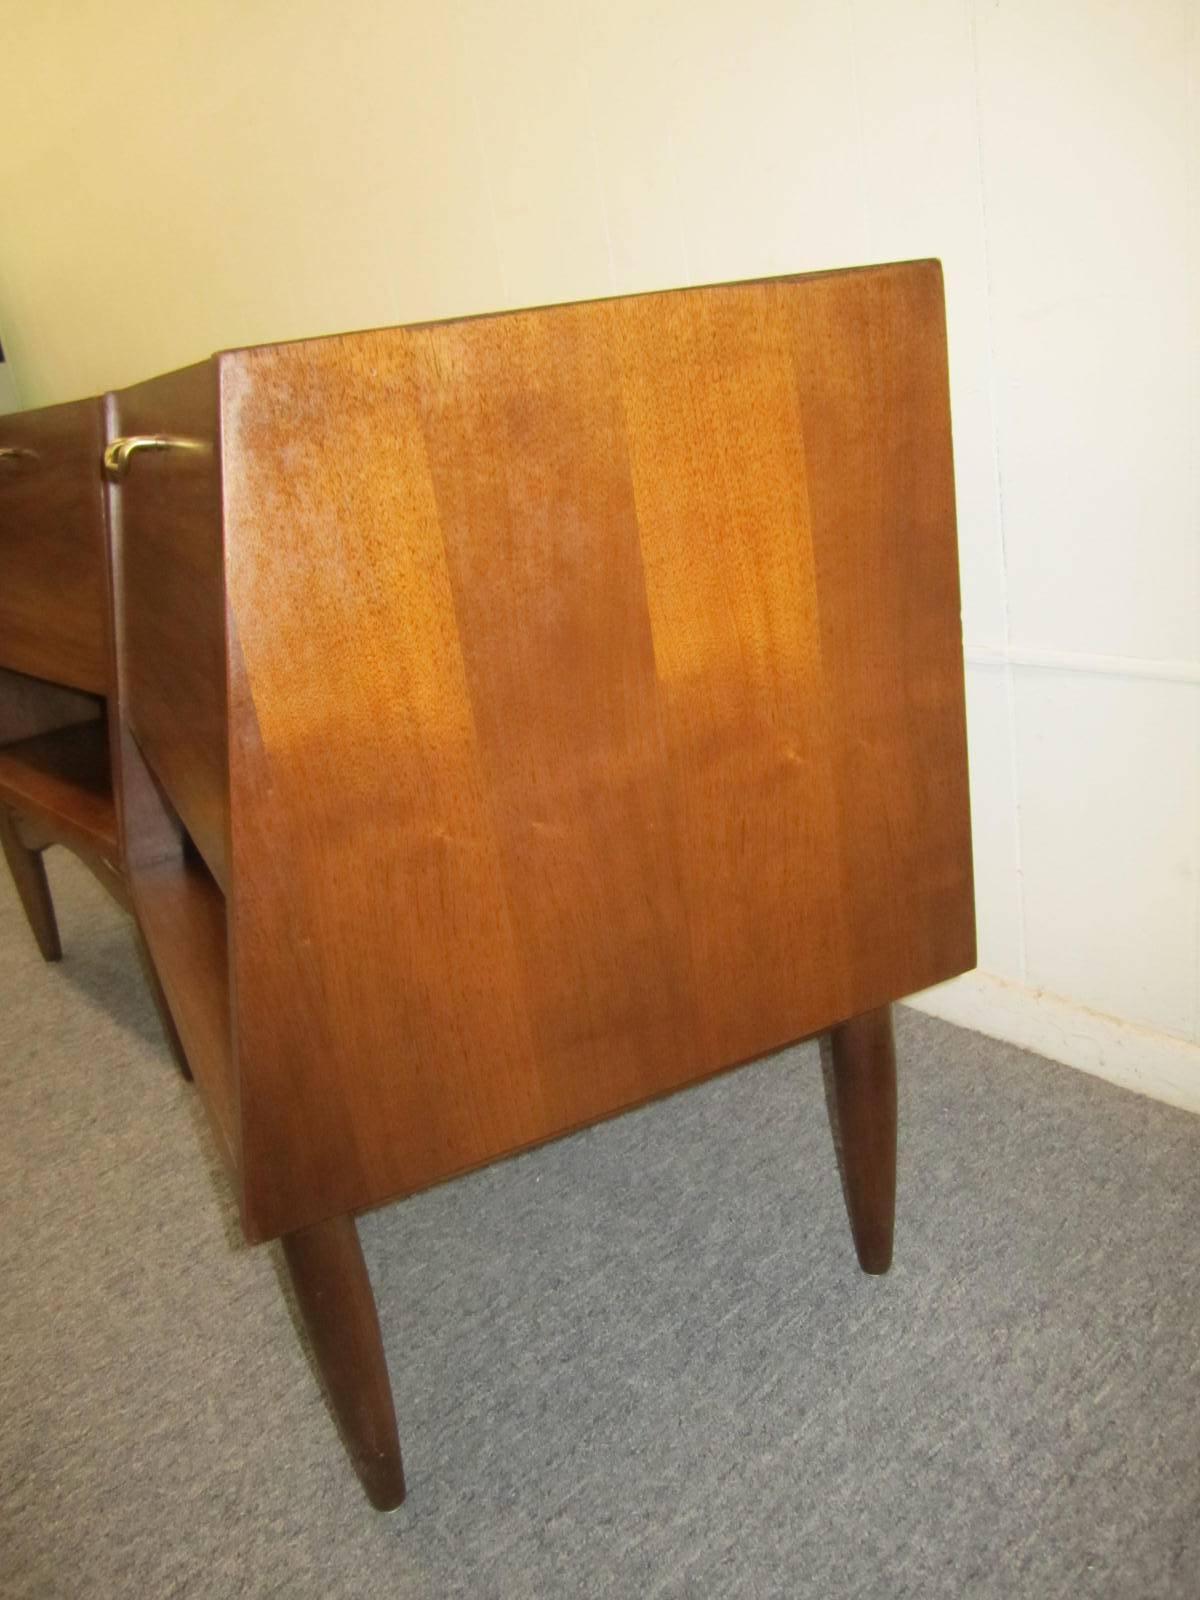 Stylish Pair of American of Martinsville Walnut Nightstands Mid-Century Modern For Sale 2